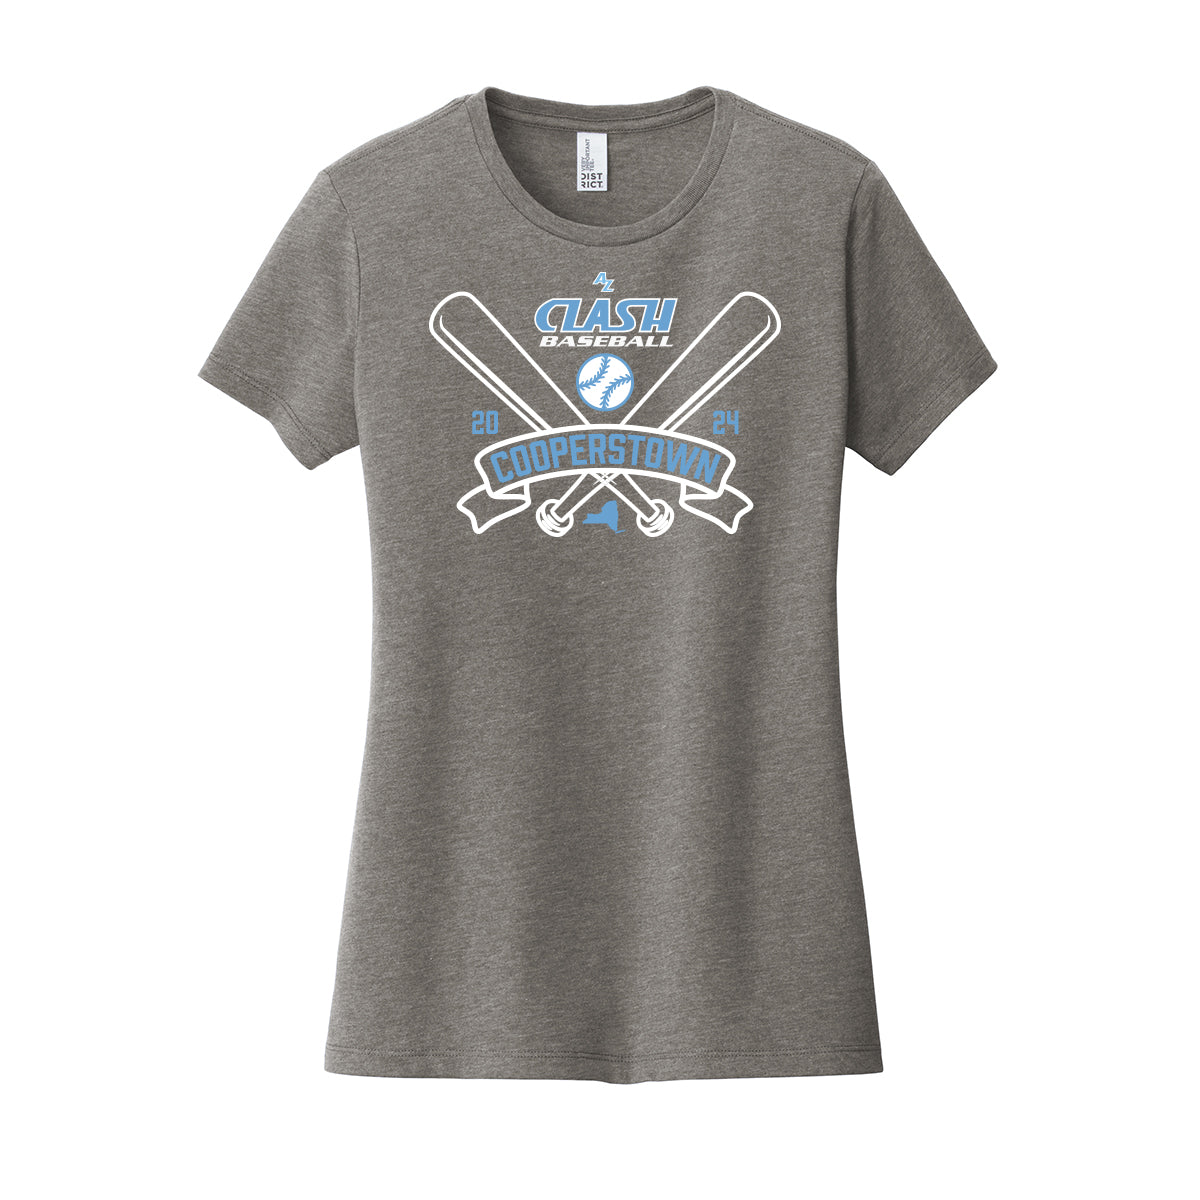 AZ Clash Cooperstown Women's Fitted Tee